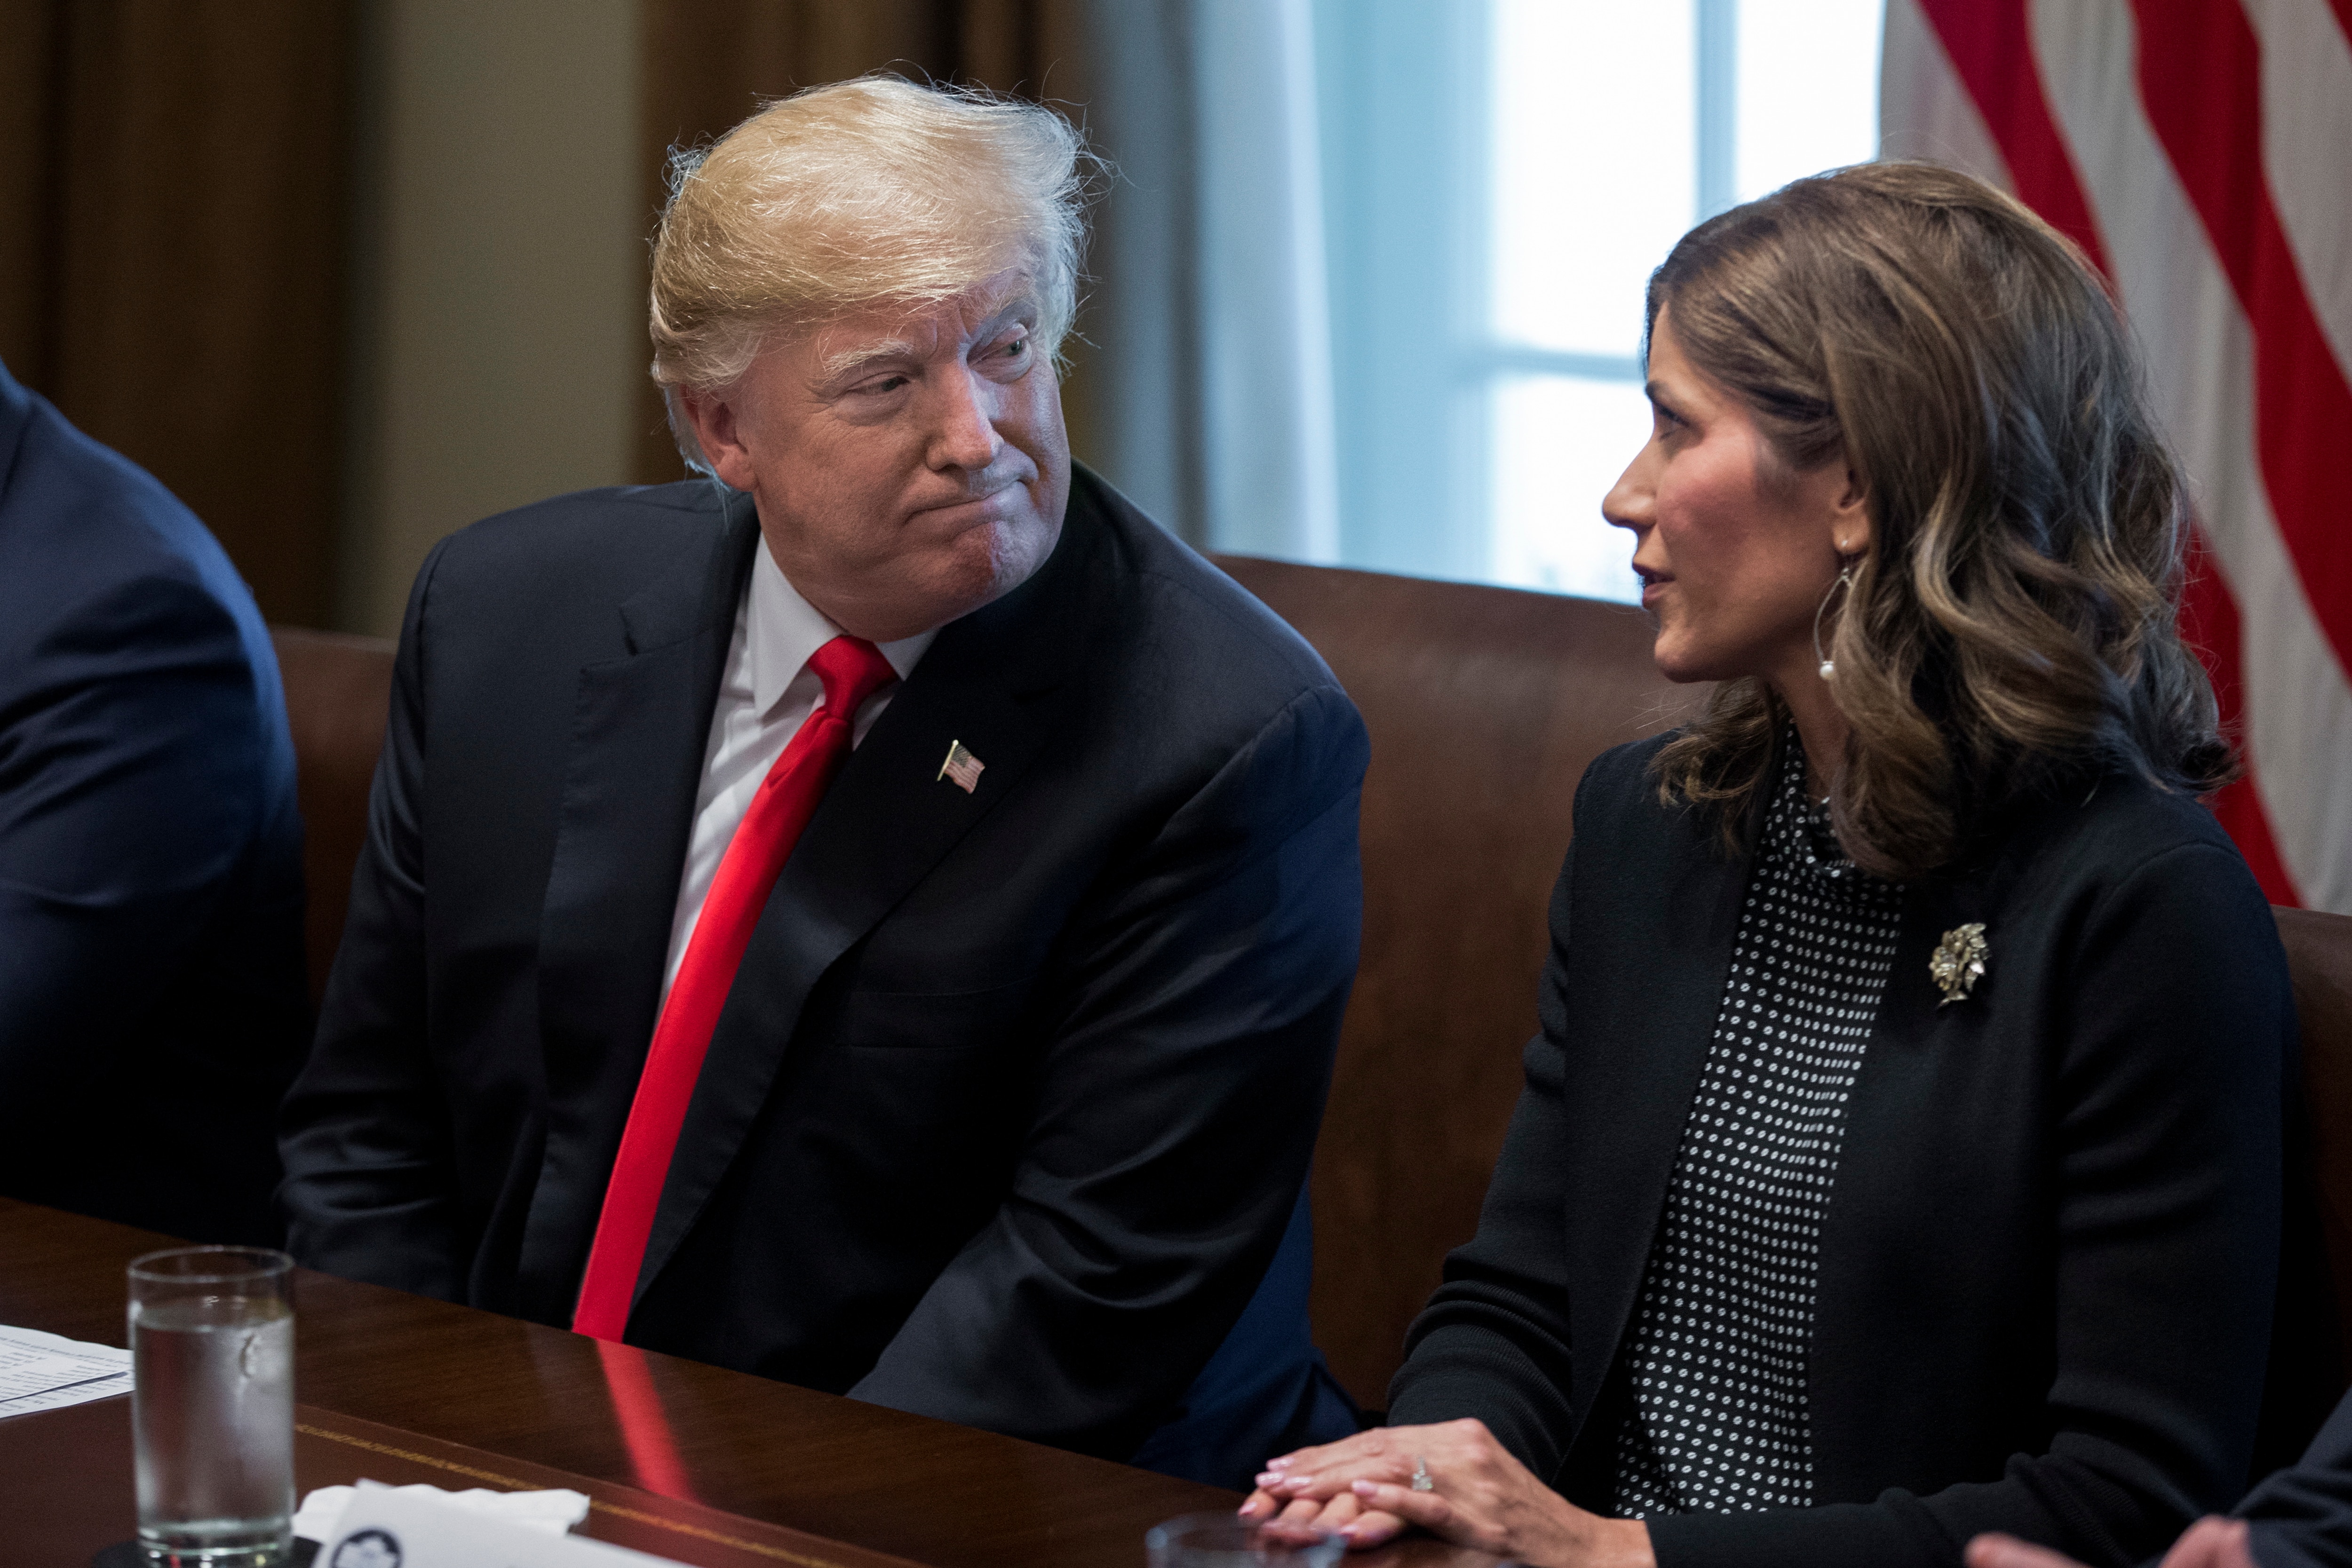 US President Donald Trump sits beside Governor-elect of South Dakota Kristi Noem during a meeting in December 2018.